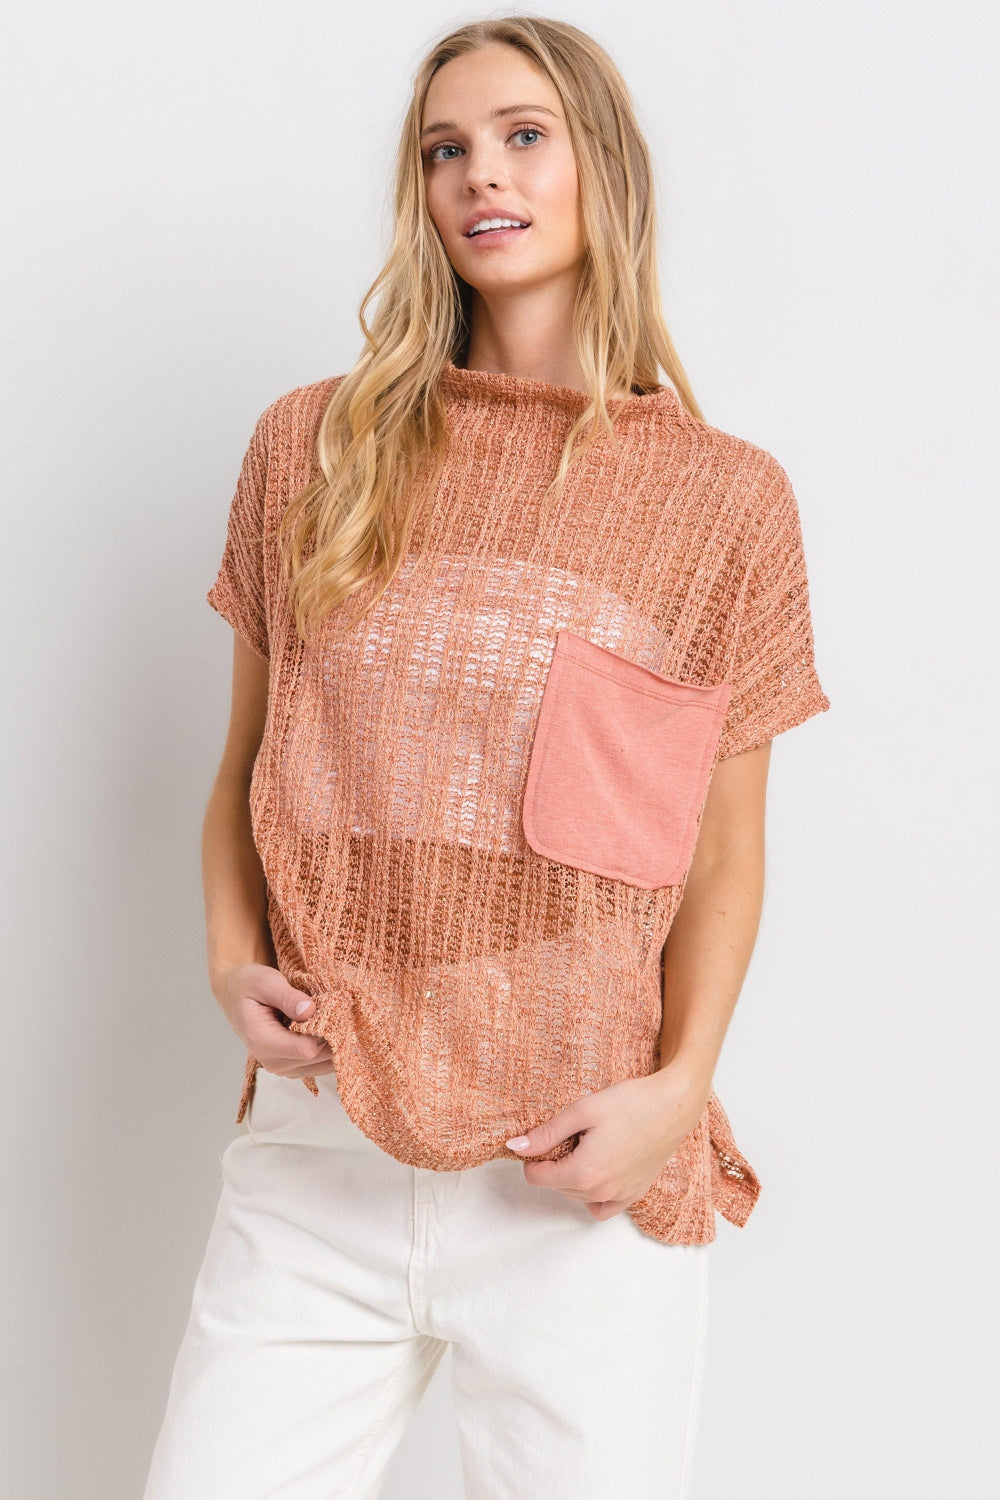 The See Through Crochet Mock Neck Cover Up is a stylish and versatile addition to your wardrobe. Perfect for layering over a swimsuit or pairing with a camisole for a boho-chic look. The intricate crochet detailing adds a touch of texture and visual interest. S-lL